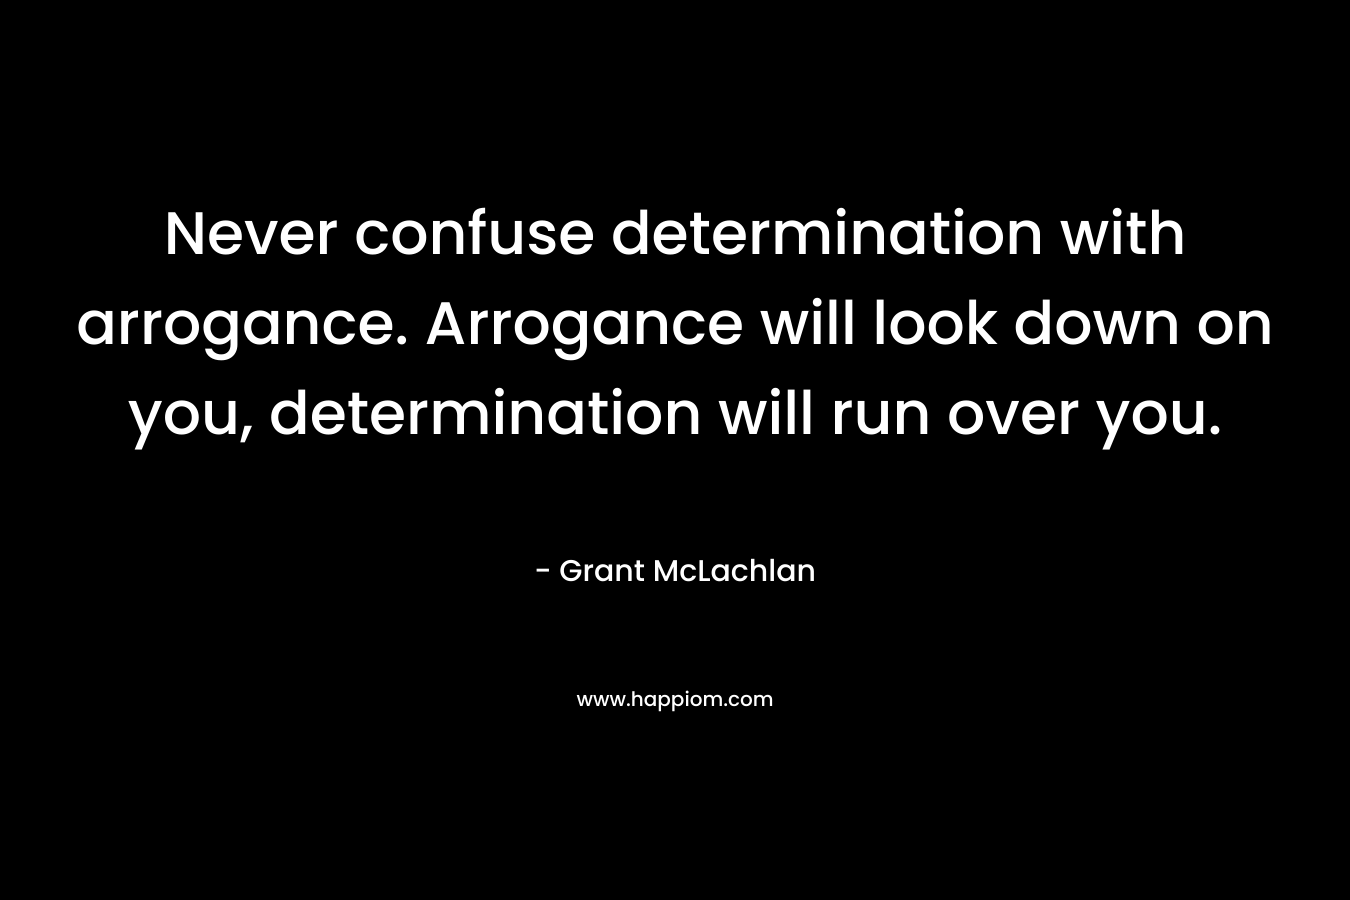 Never confuse determination with arrogance. Arrogance will look down on you, determination will run over you. – Grant McLachlan